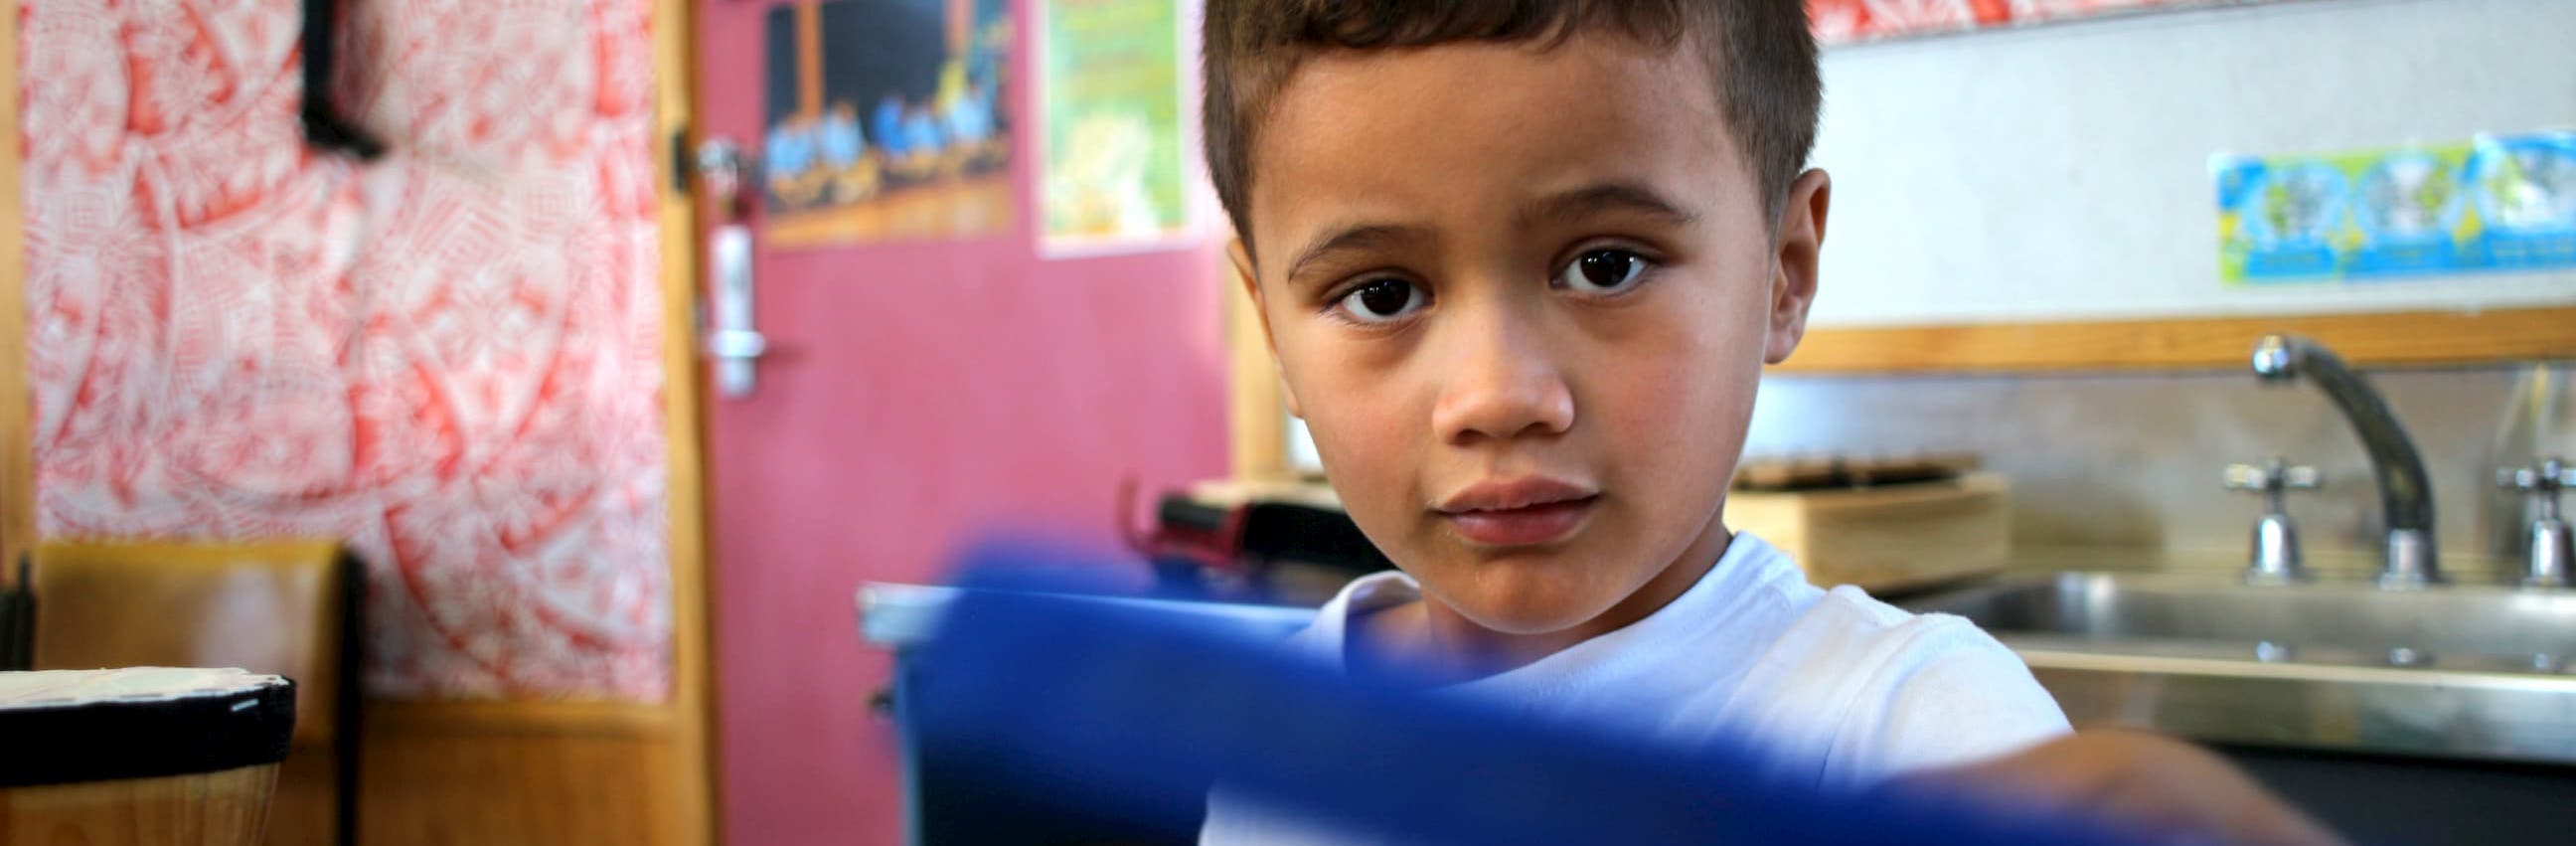 A young Māori boy looks at the camera while standing in a classroom